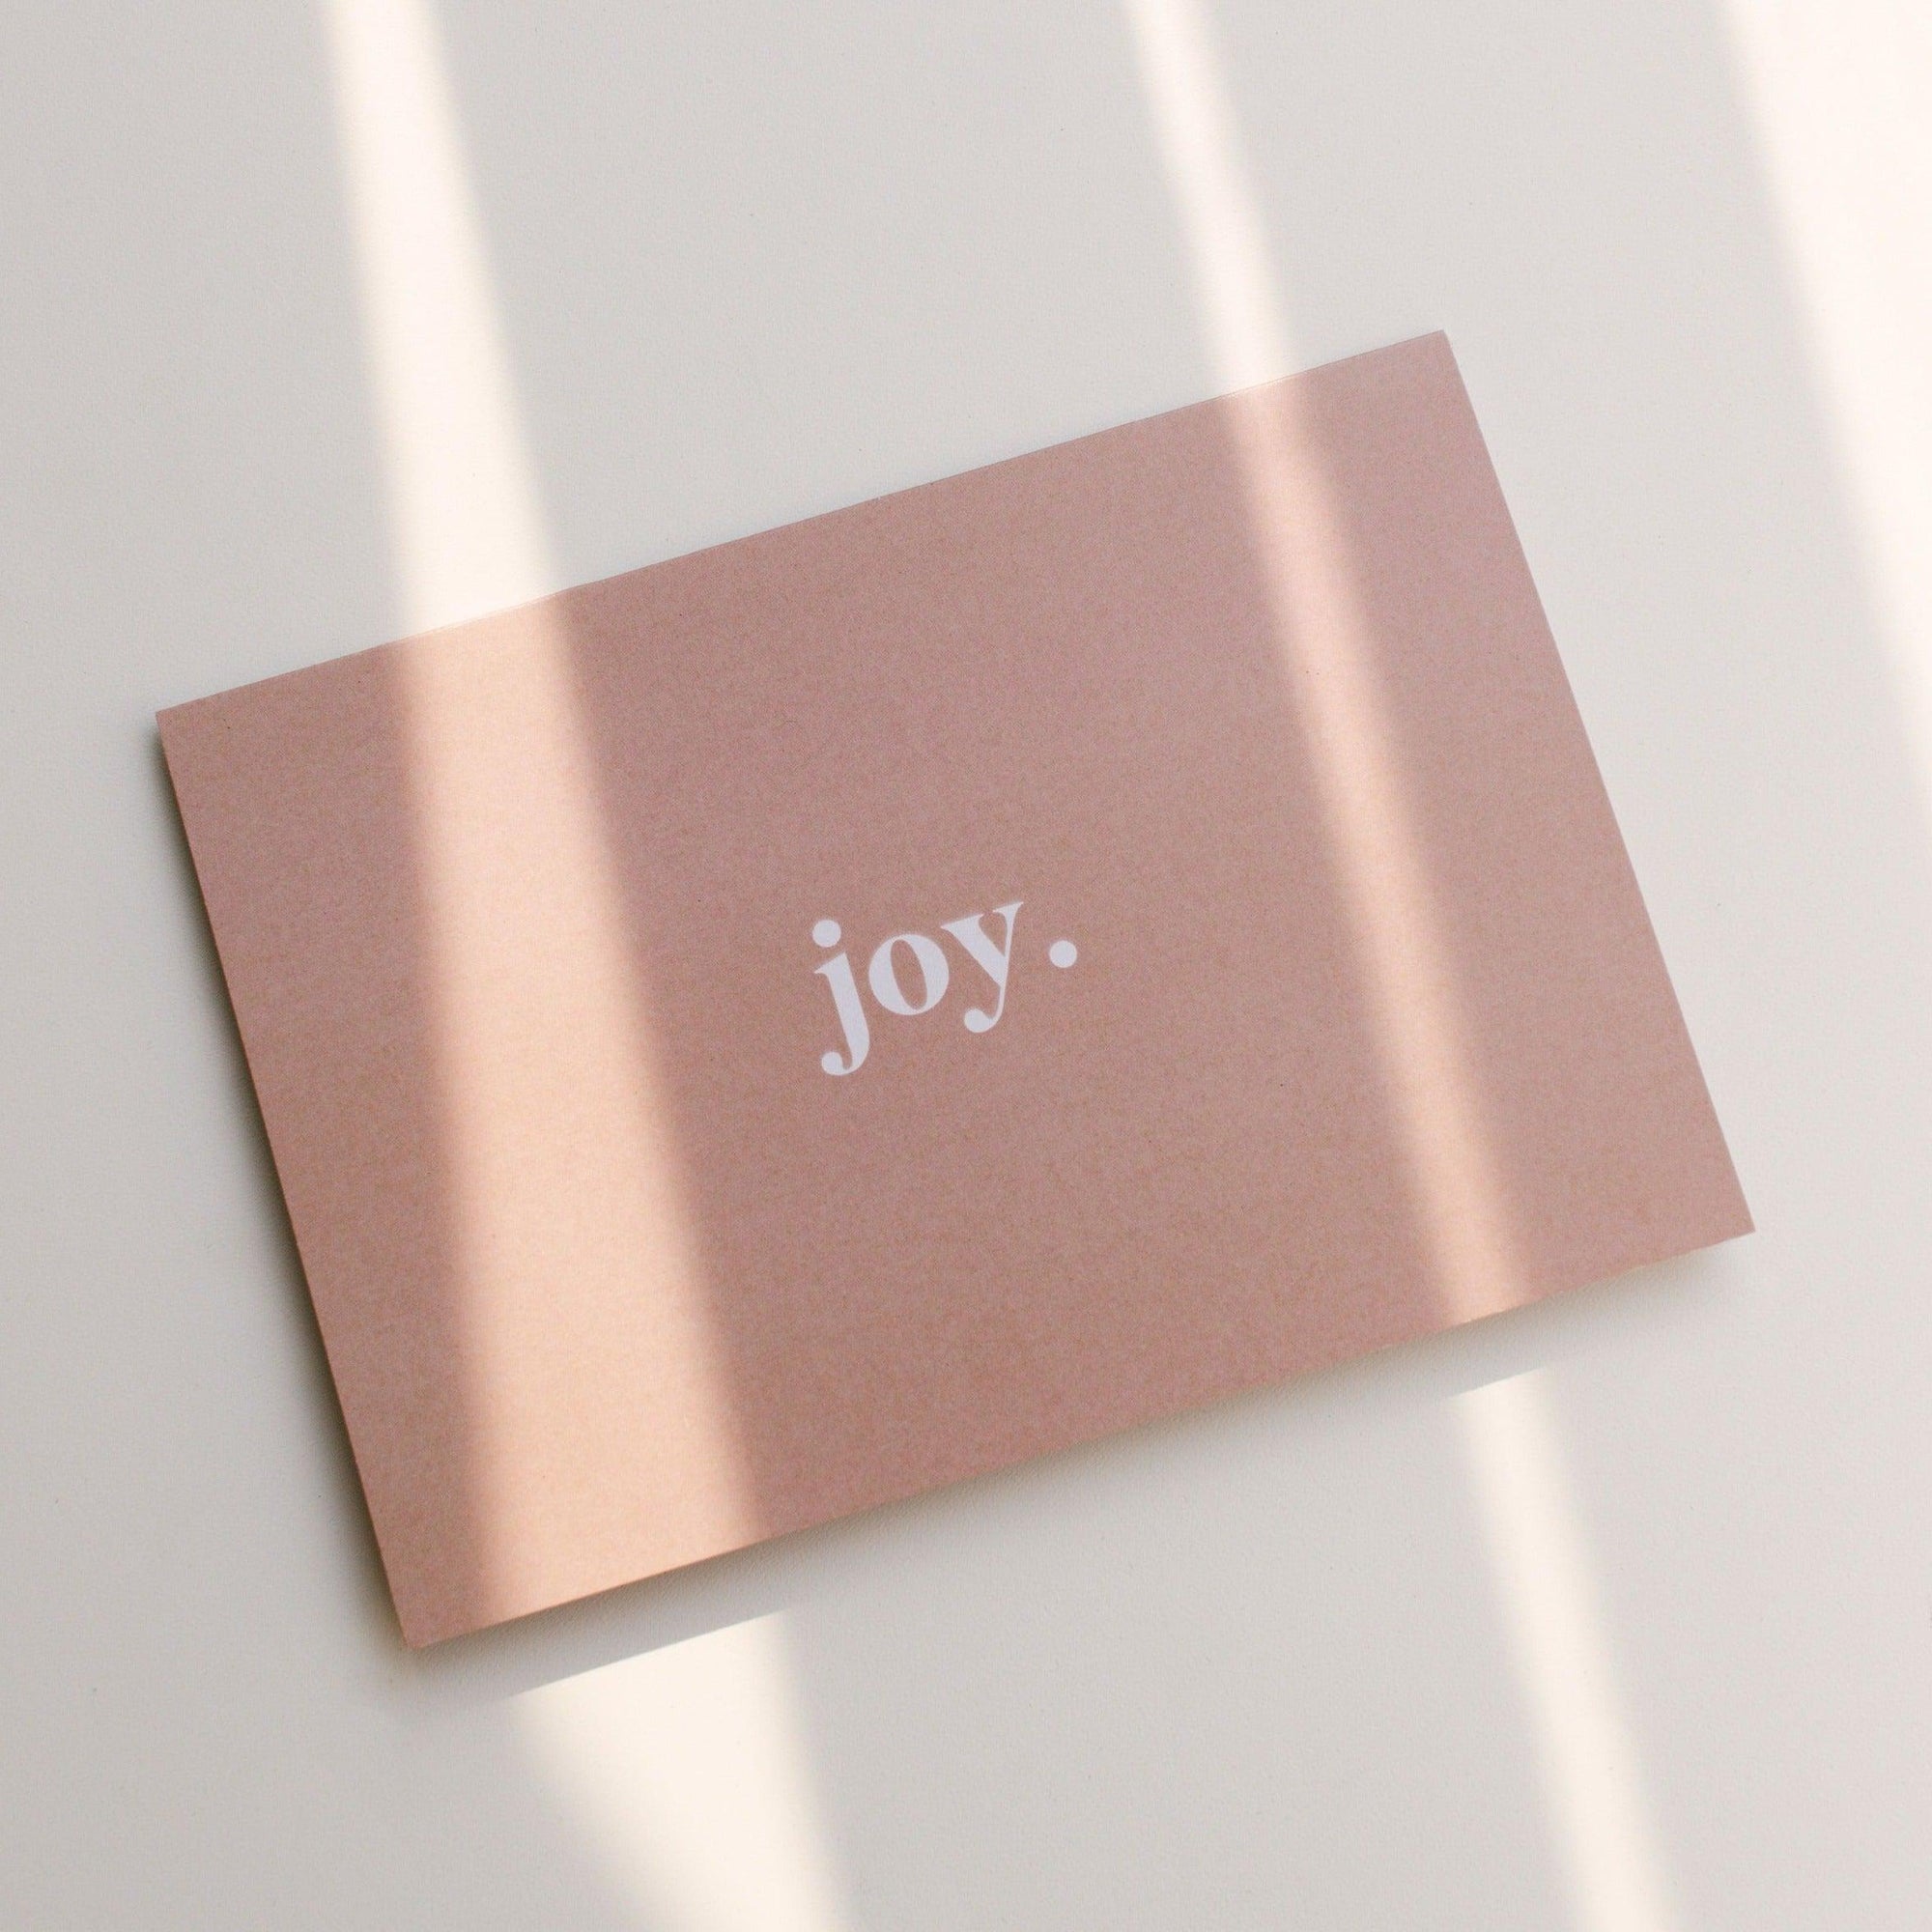 A pink card with the word joy on it, perfect for spreading happiness and positivity. Ideal as a biglittlethings gift voucher to bring a smile to your loved ones' faces.